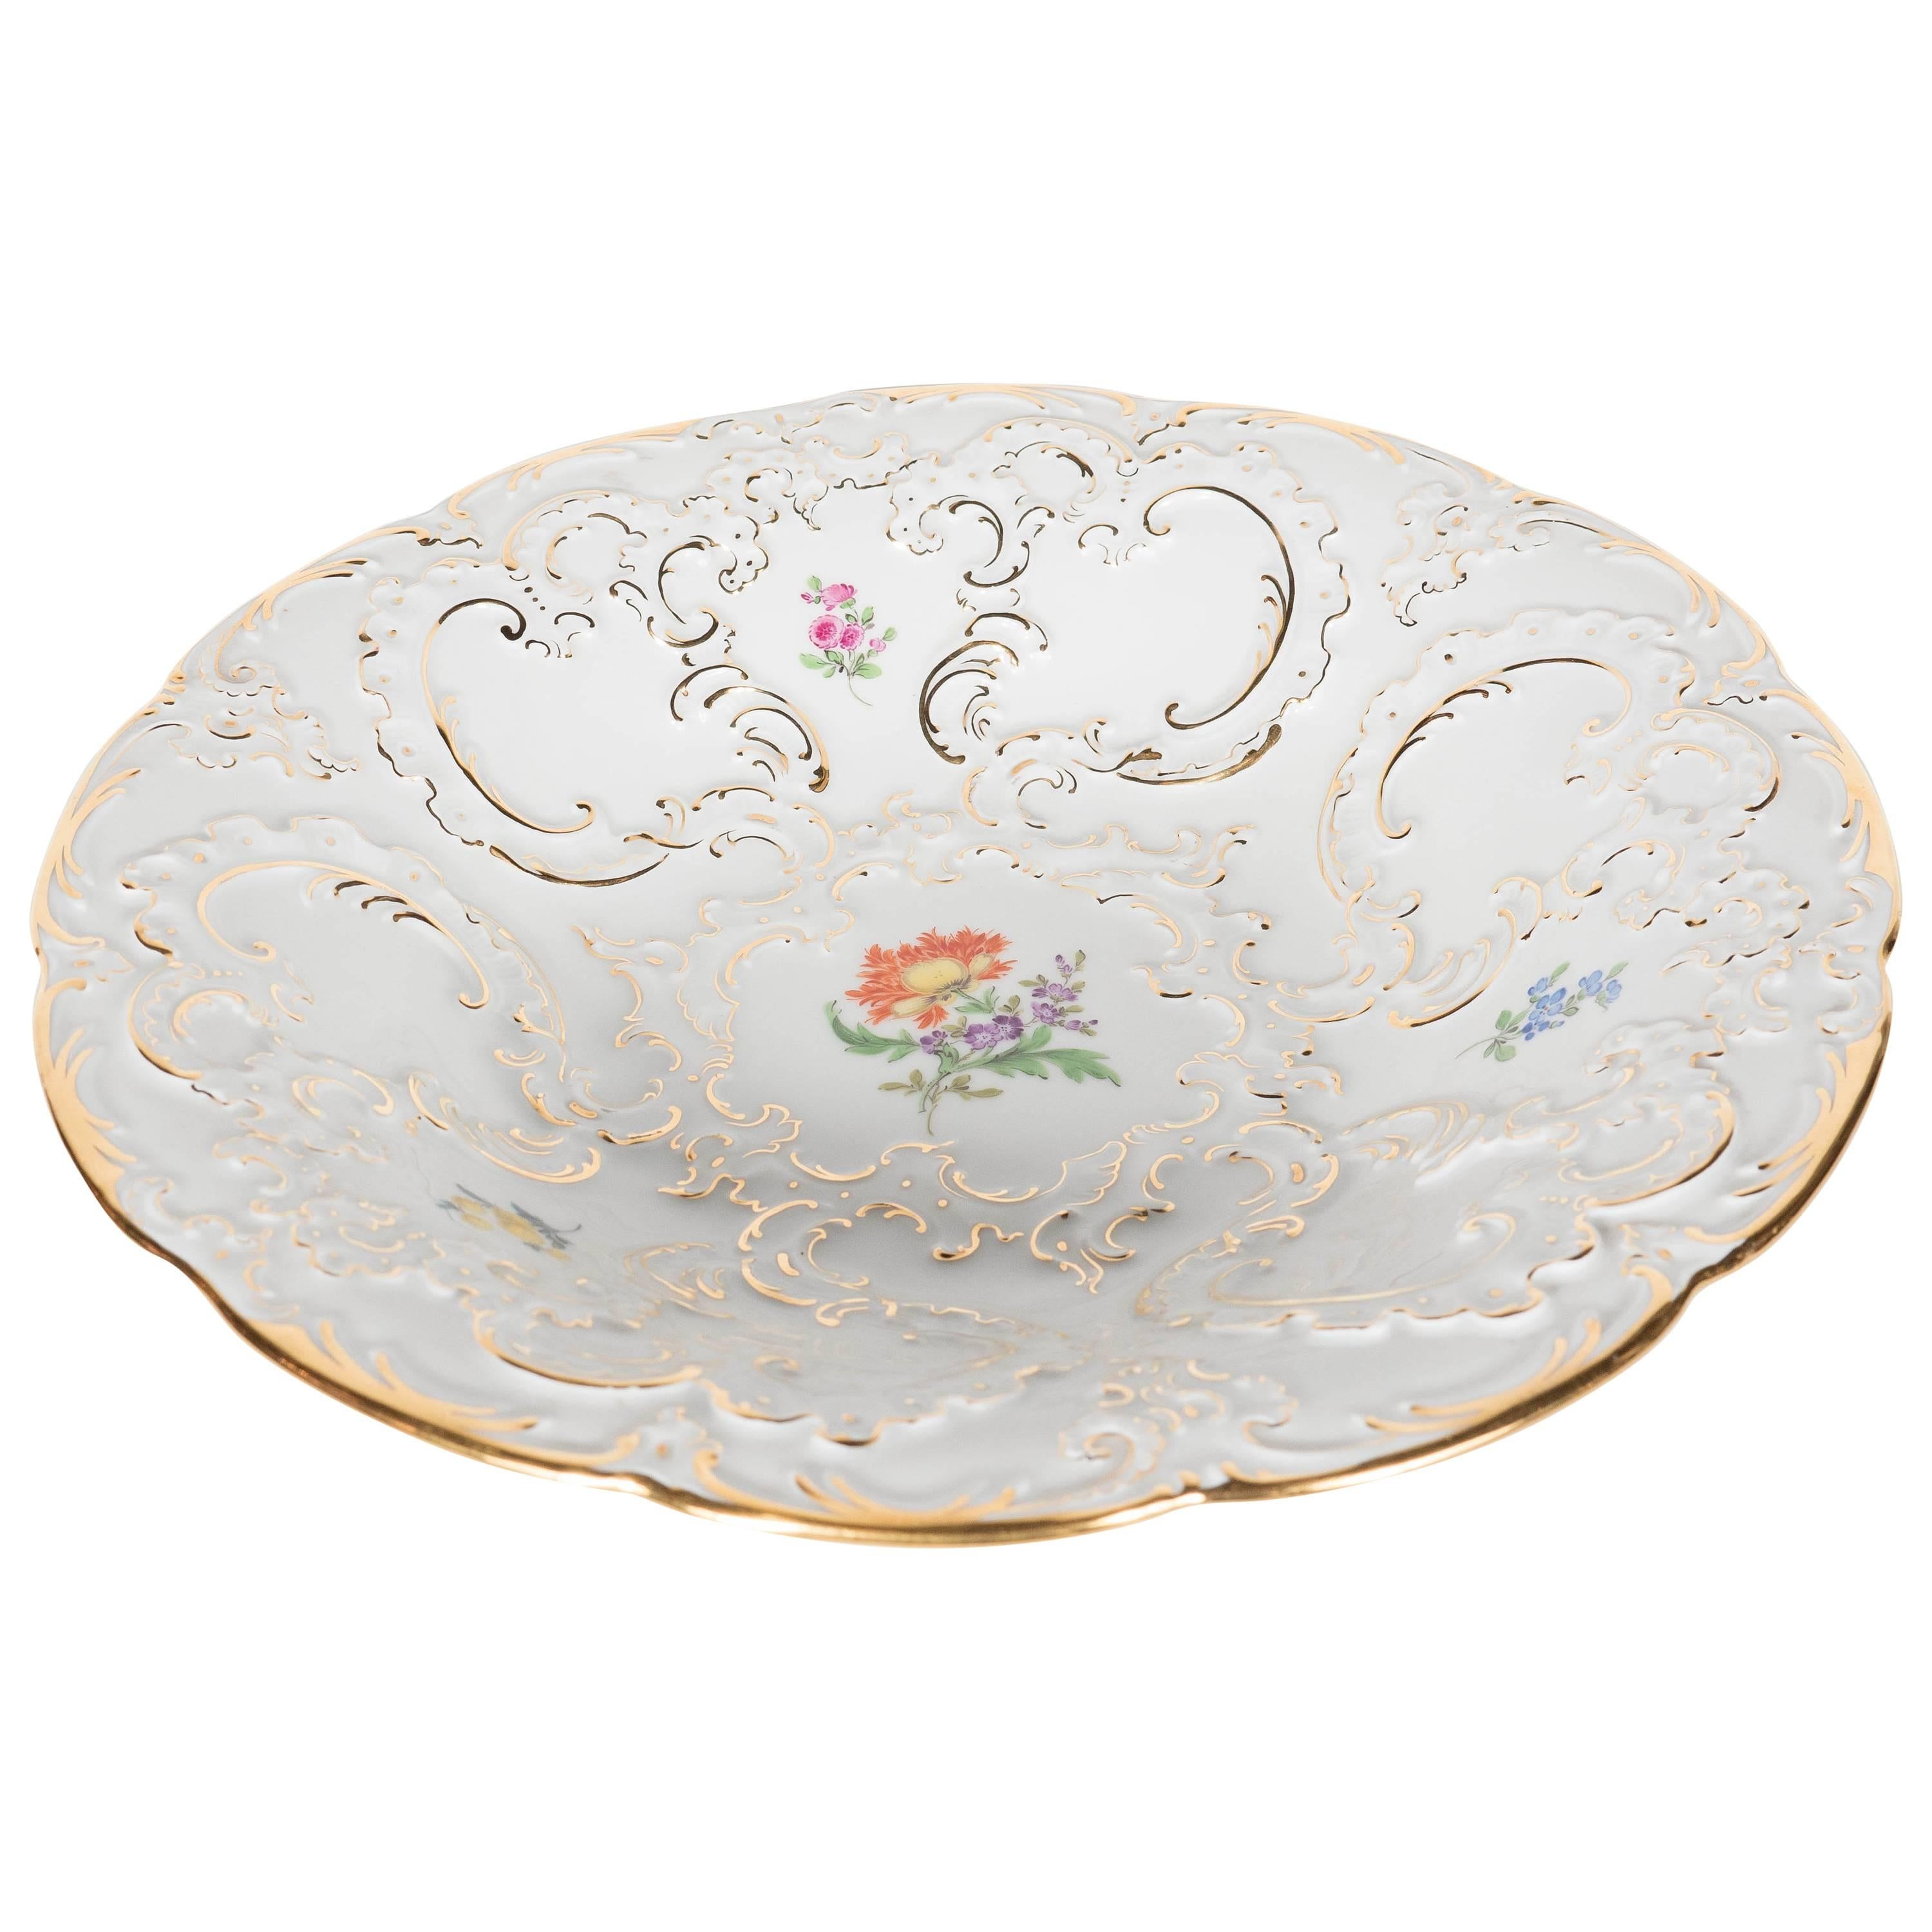 Exquisite Classical Relief-Form Porcelain Bowl with Floral Design by Meissen